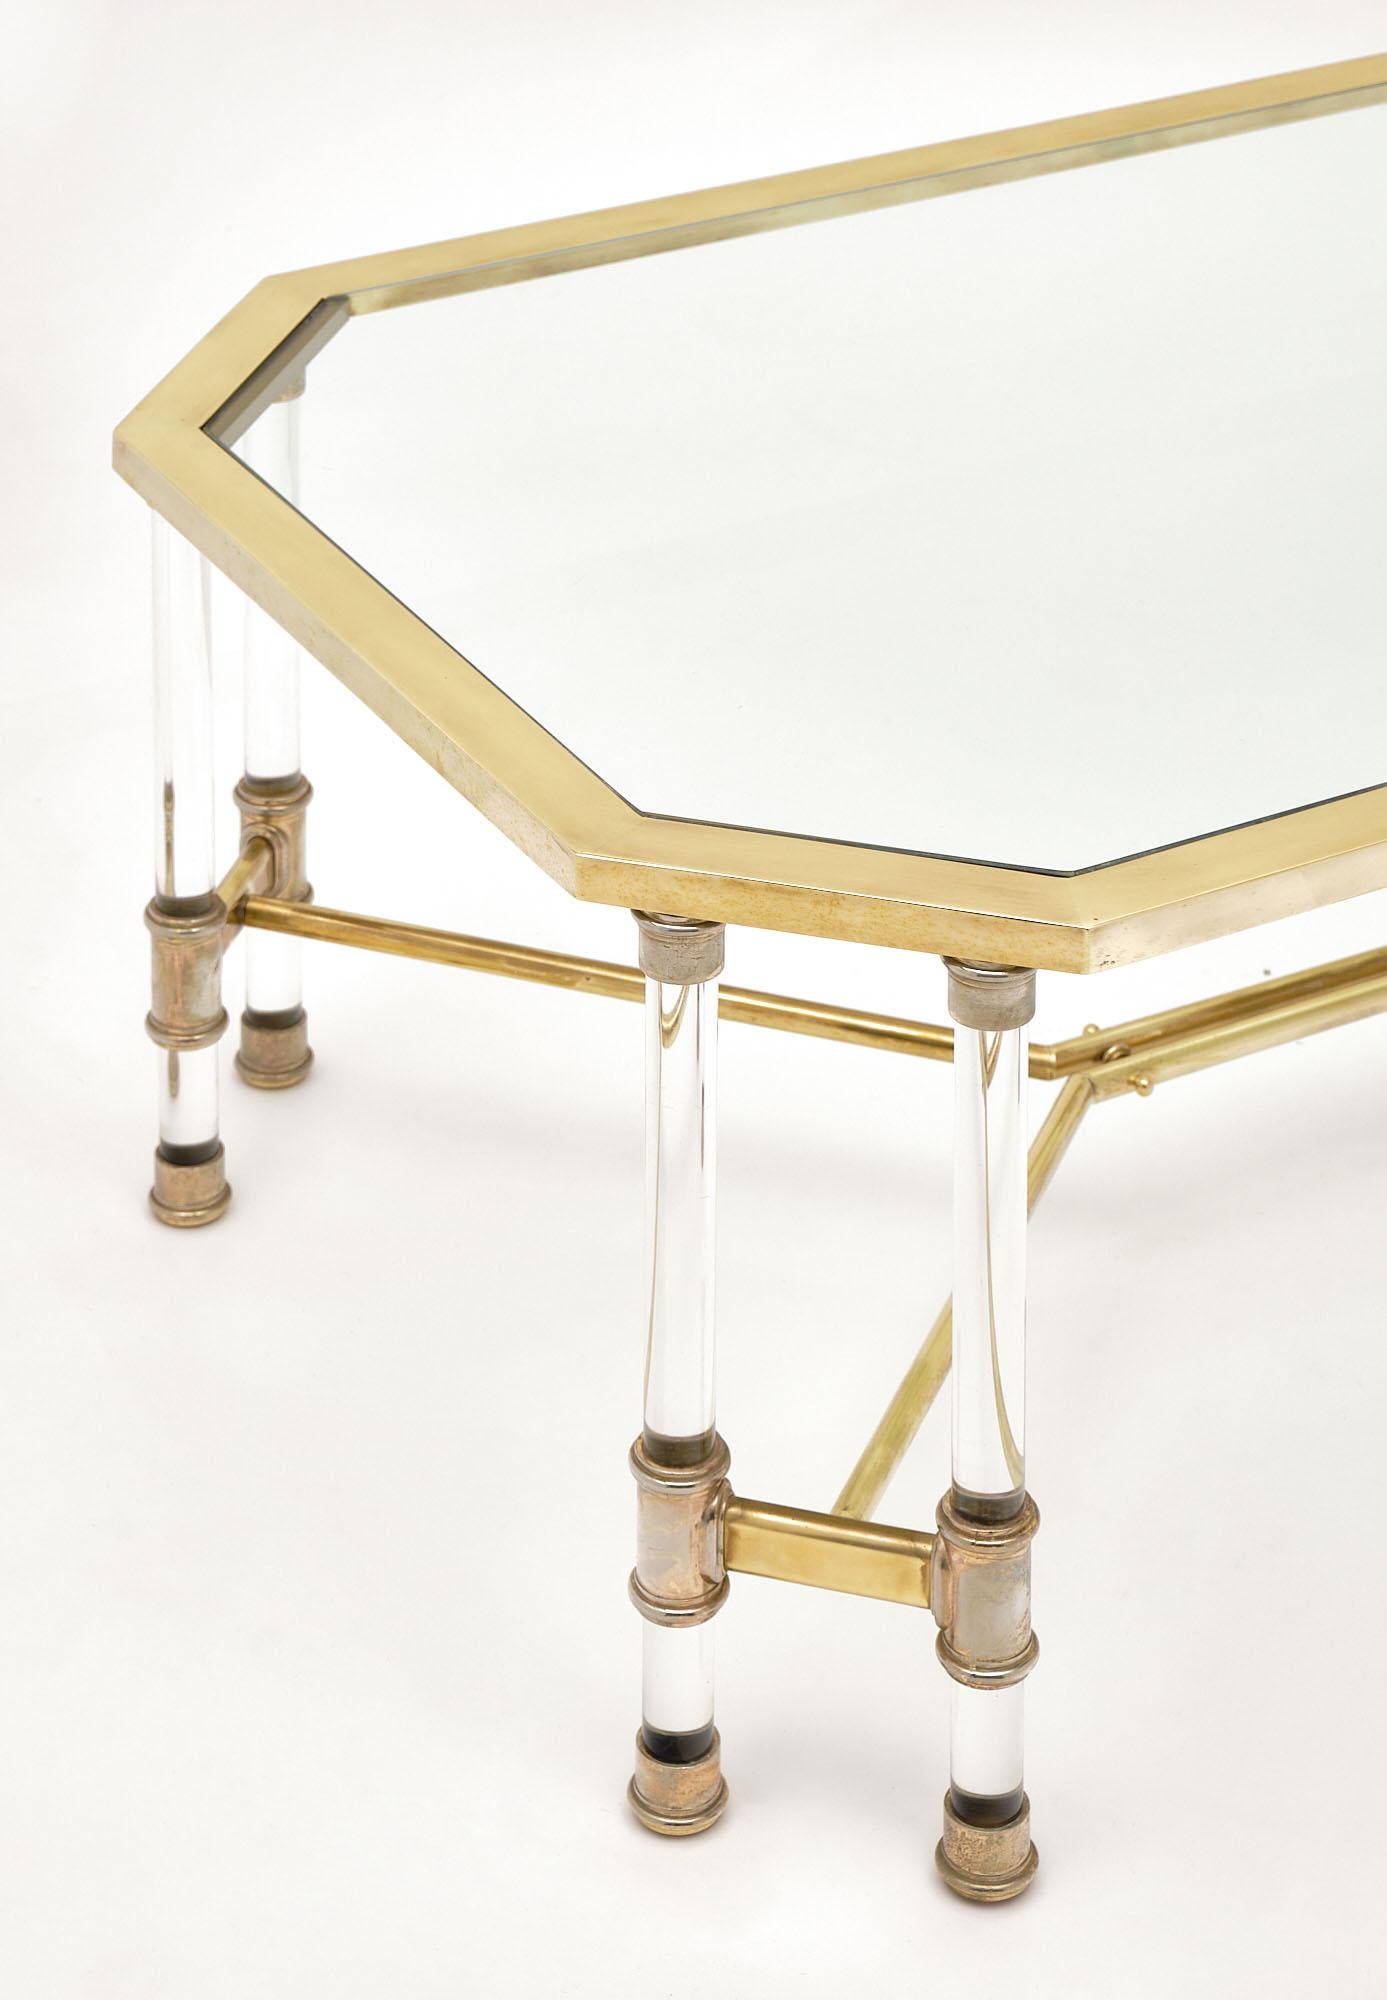 Coffee table, French, of Lucite and brass featuring a gilt brass structure with double Lucite columns in each corner. There is a brass stretcher and glass top.